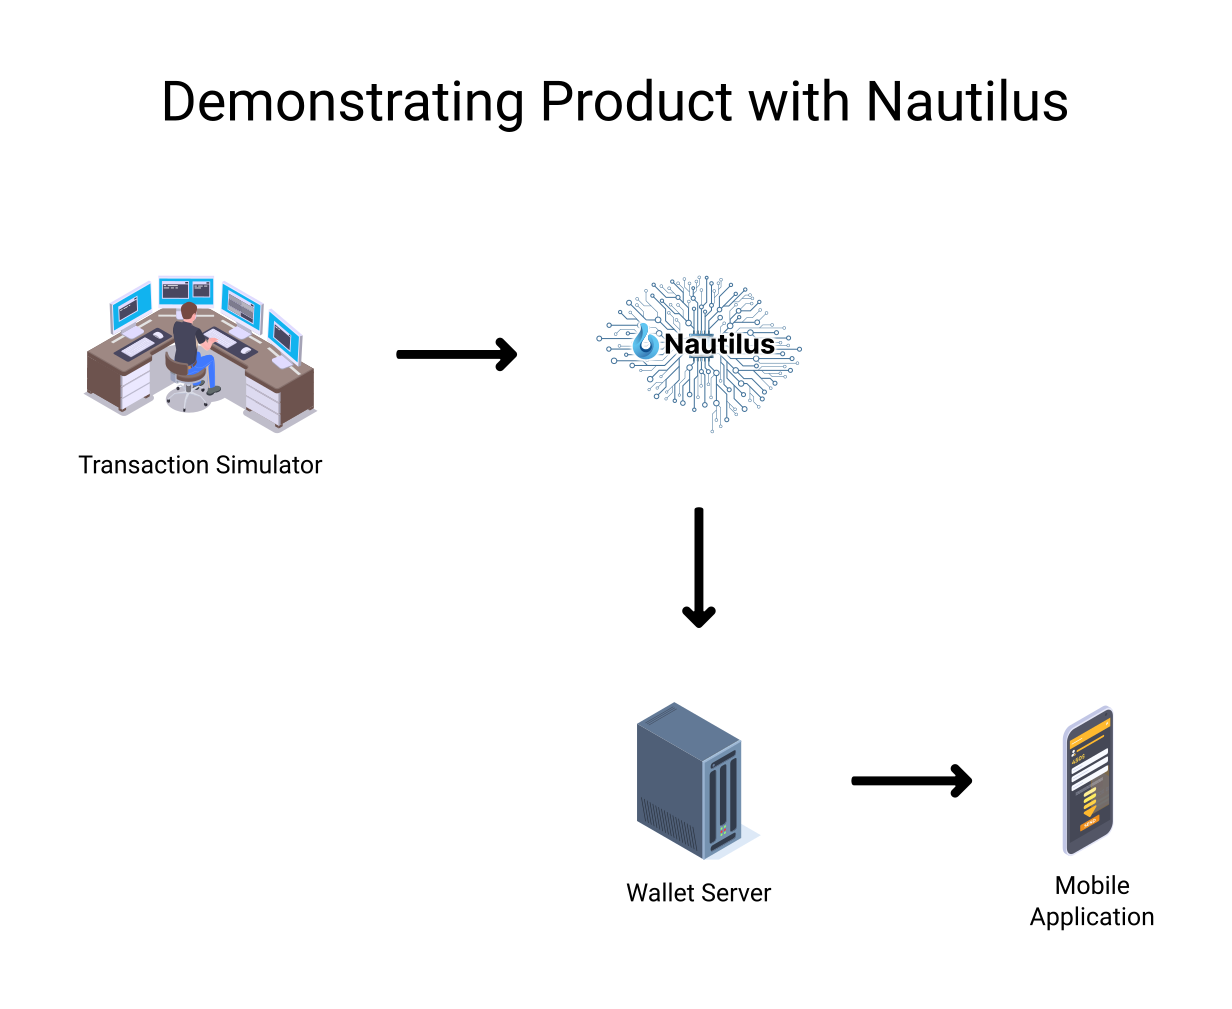 Diagram showing how to use Nautilus to demo product